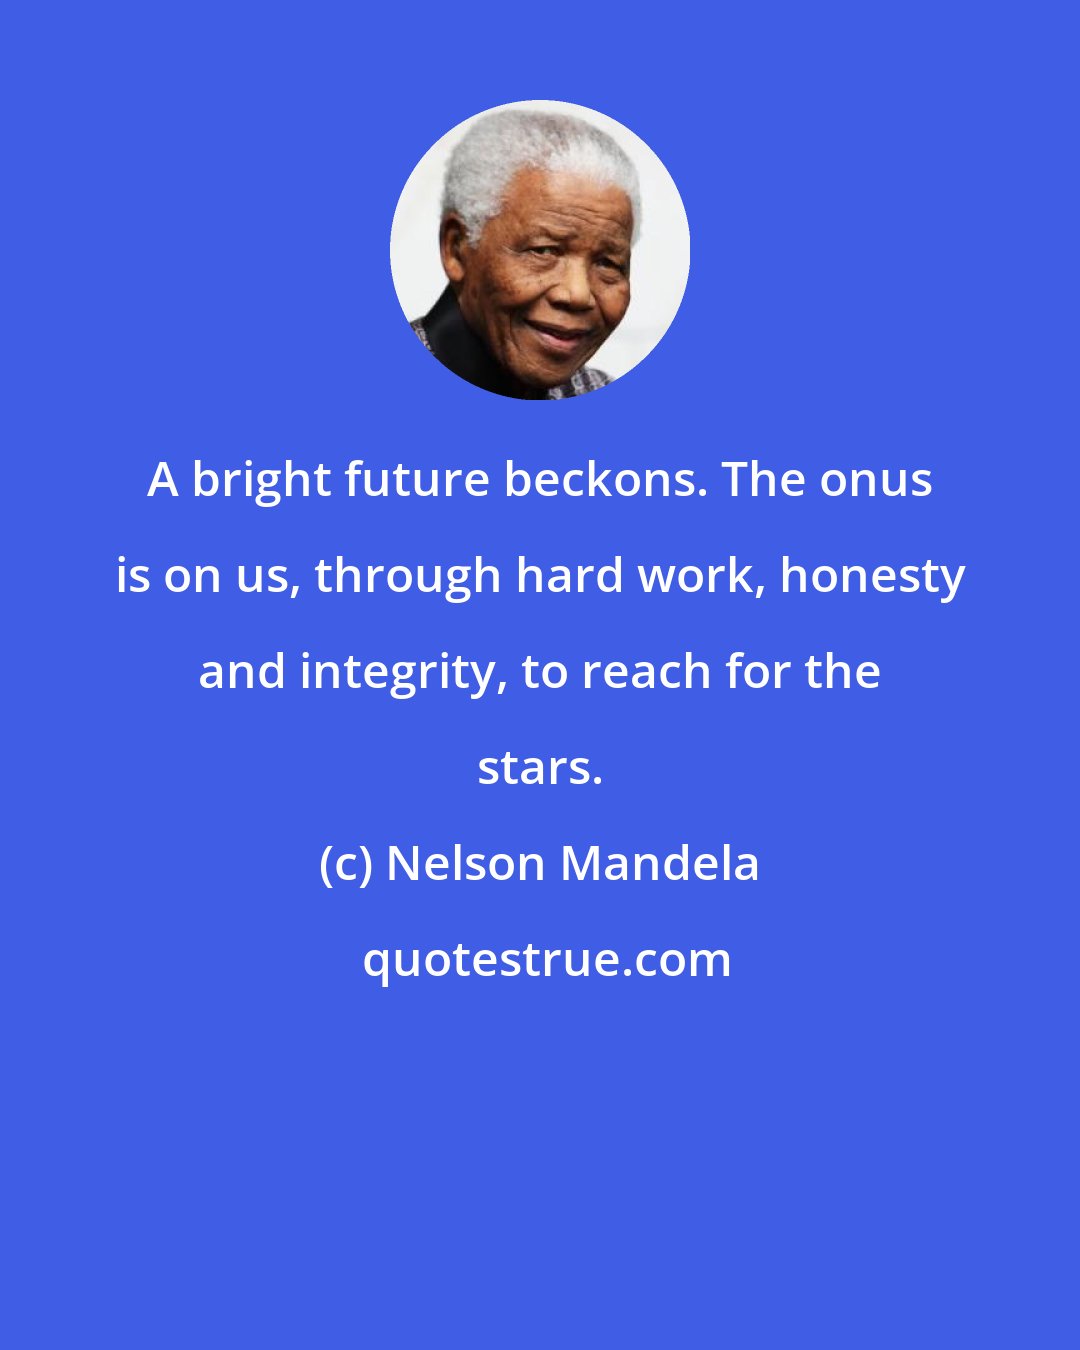 Nelson Mandela: A bright future beckons. The onus is on us, through hard work, honesty and integrity, to reach for the stars.